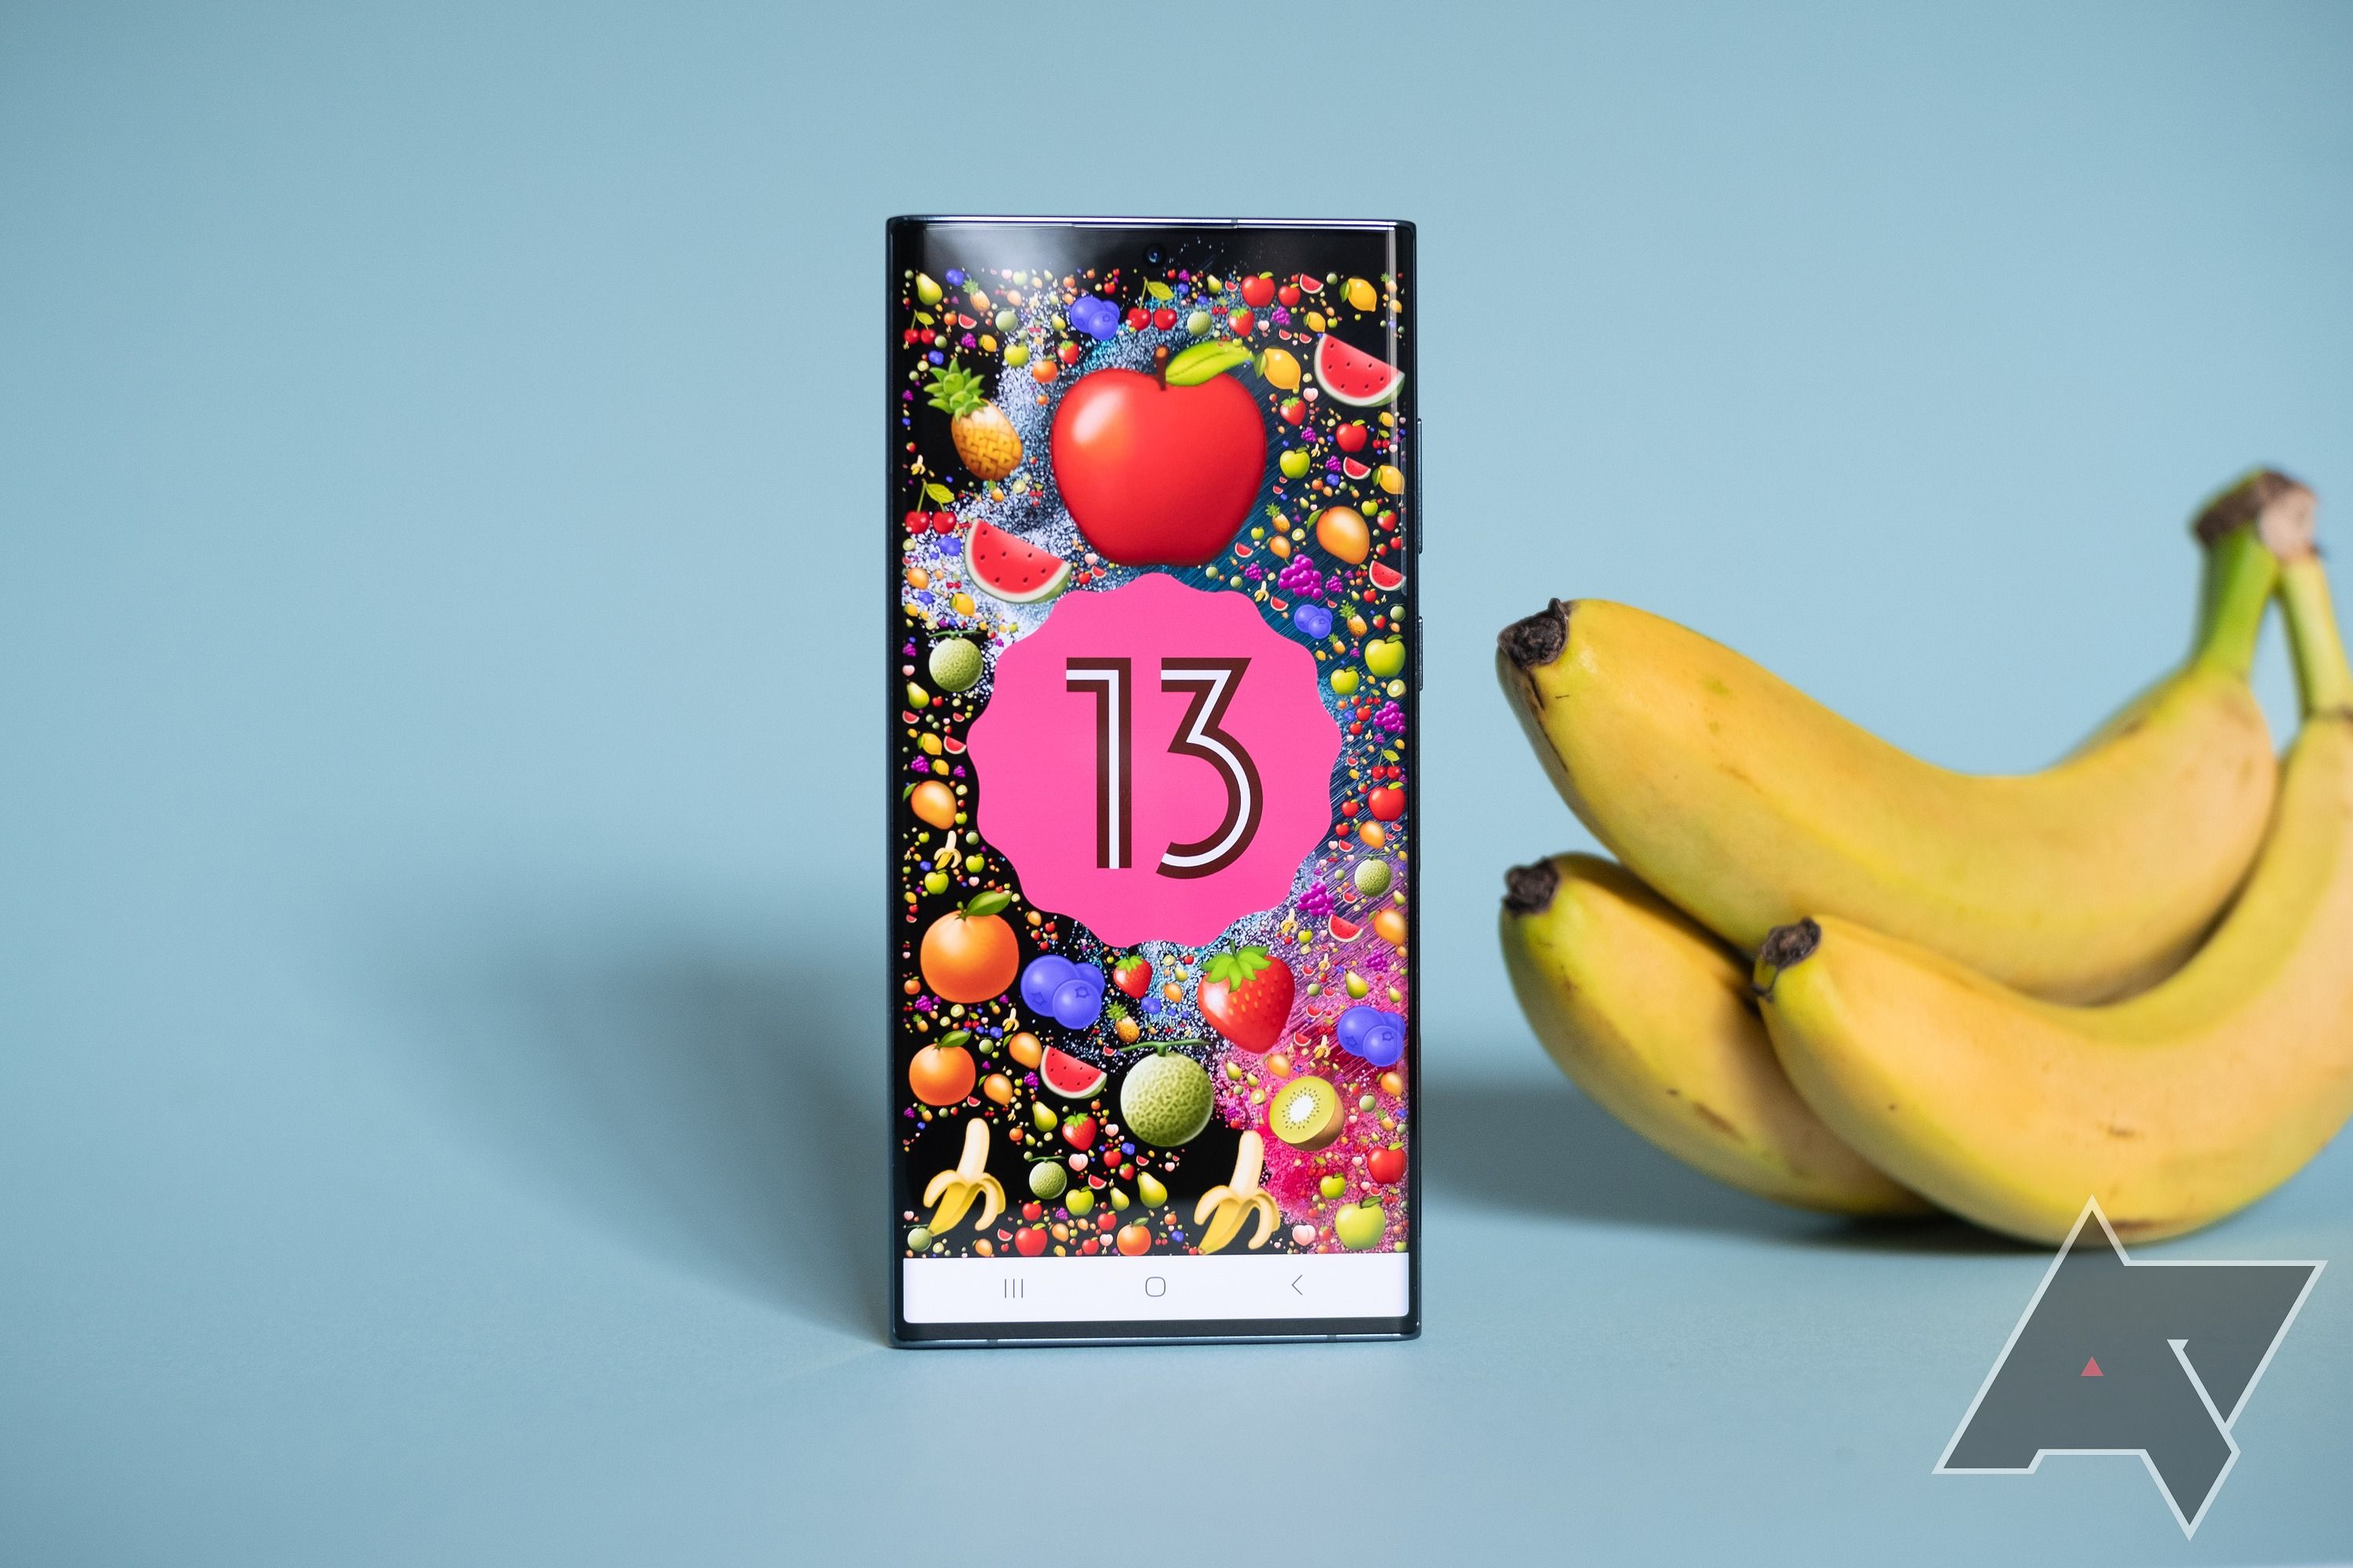 A Samsung Galaxy S22 Ultra, showing the Android 13 emoji easter egg, sitting next to a bunch of bananas.